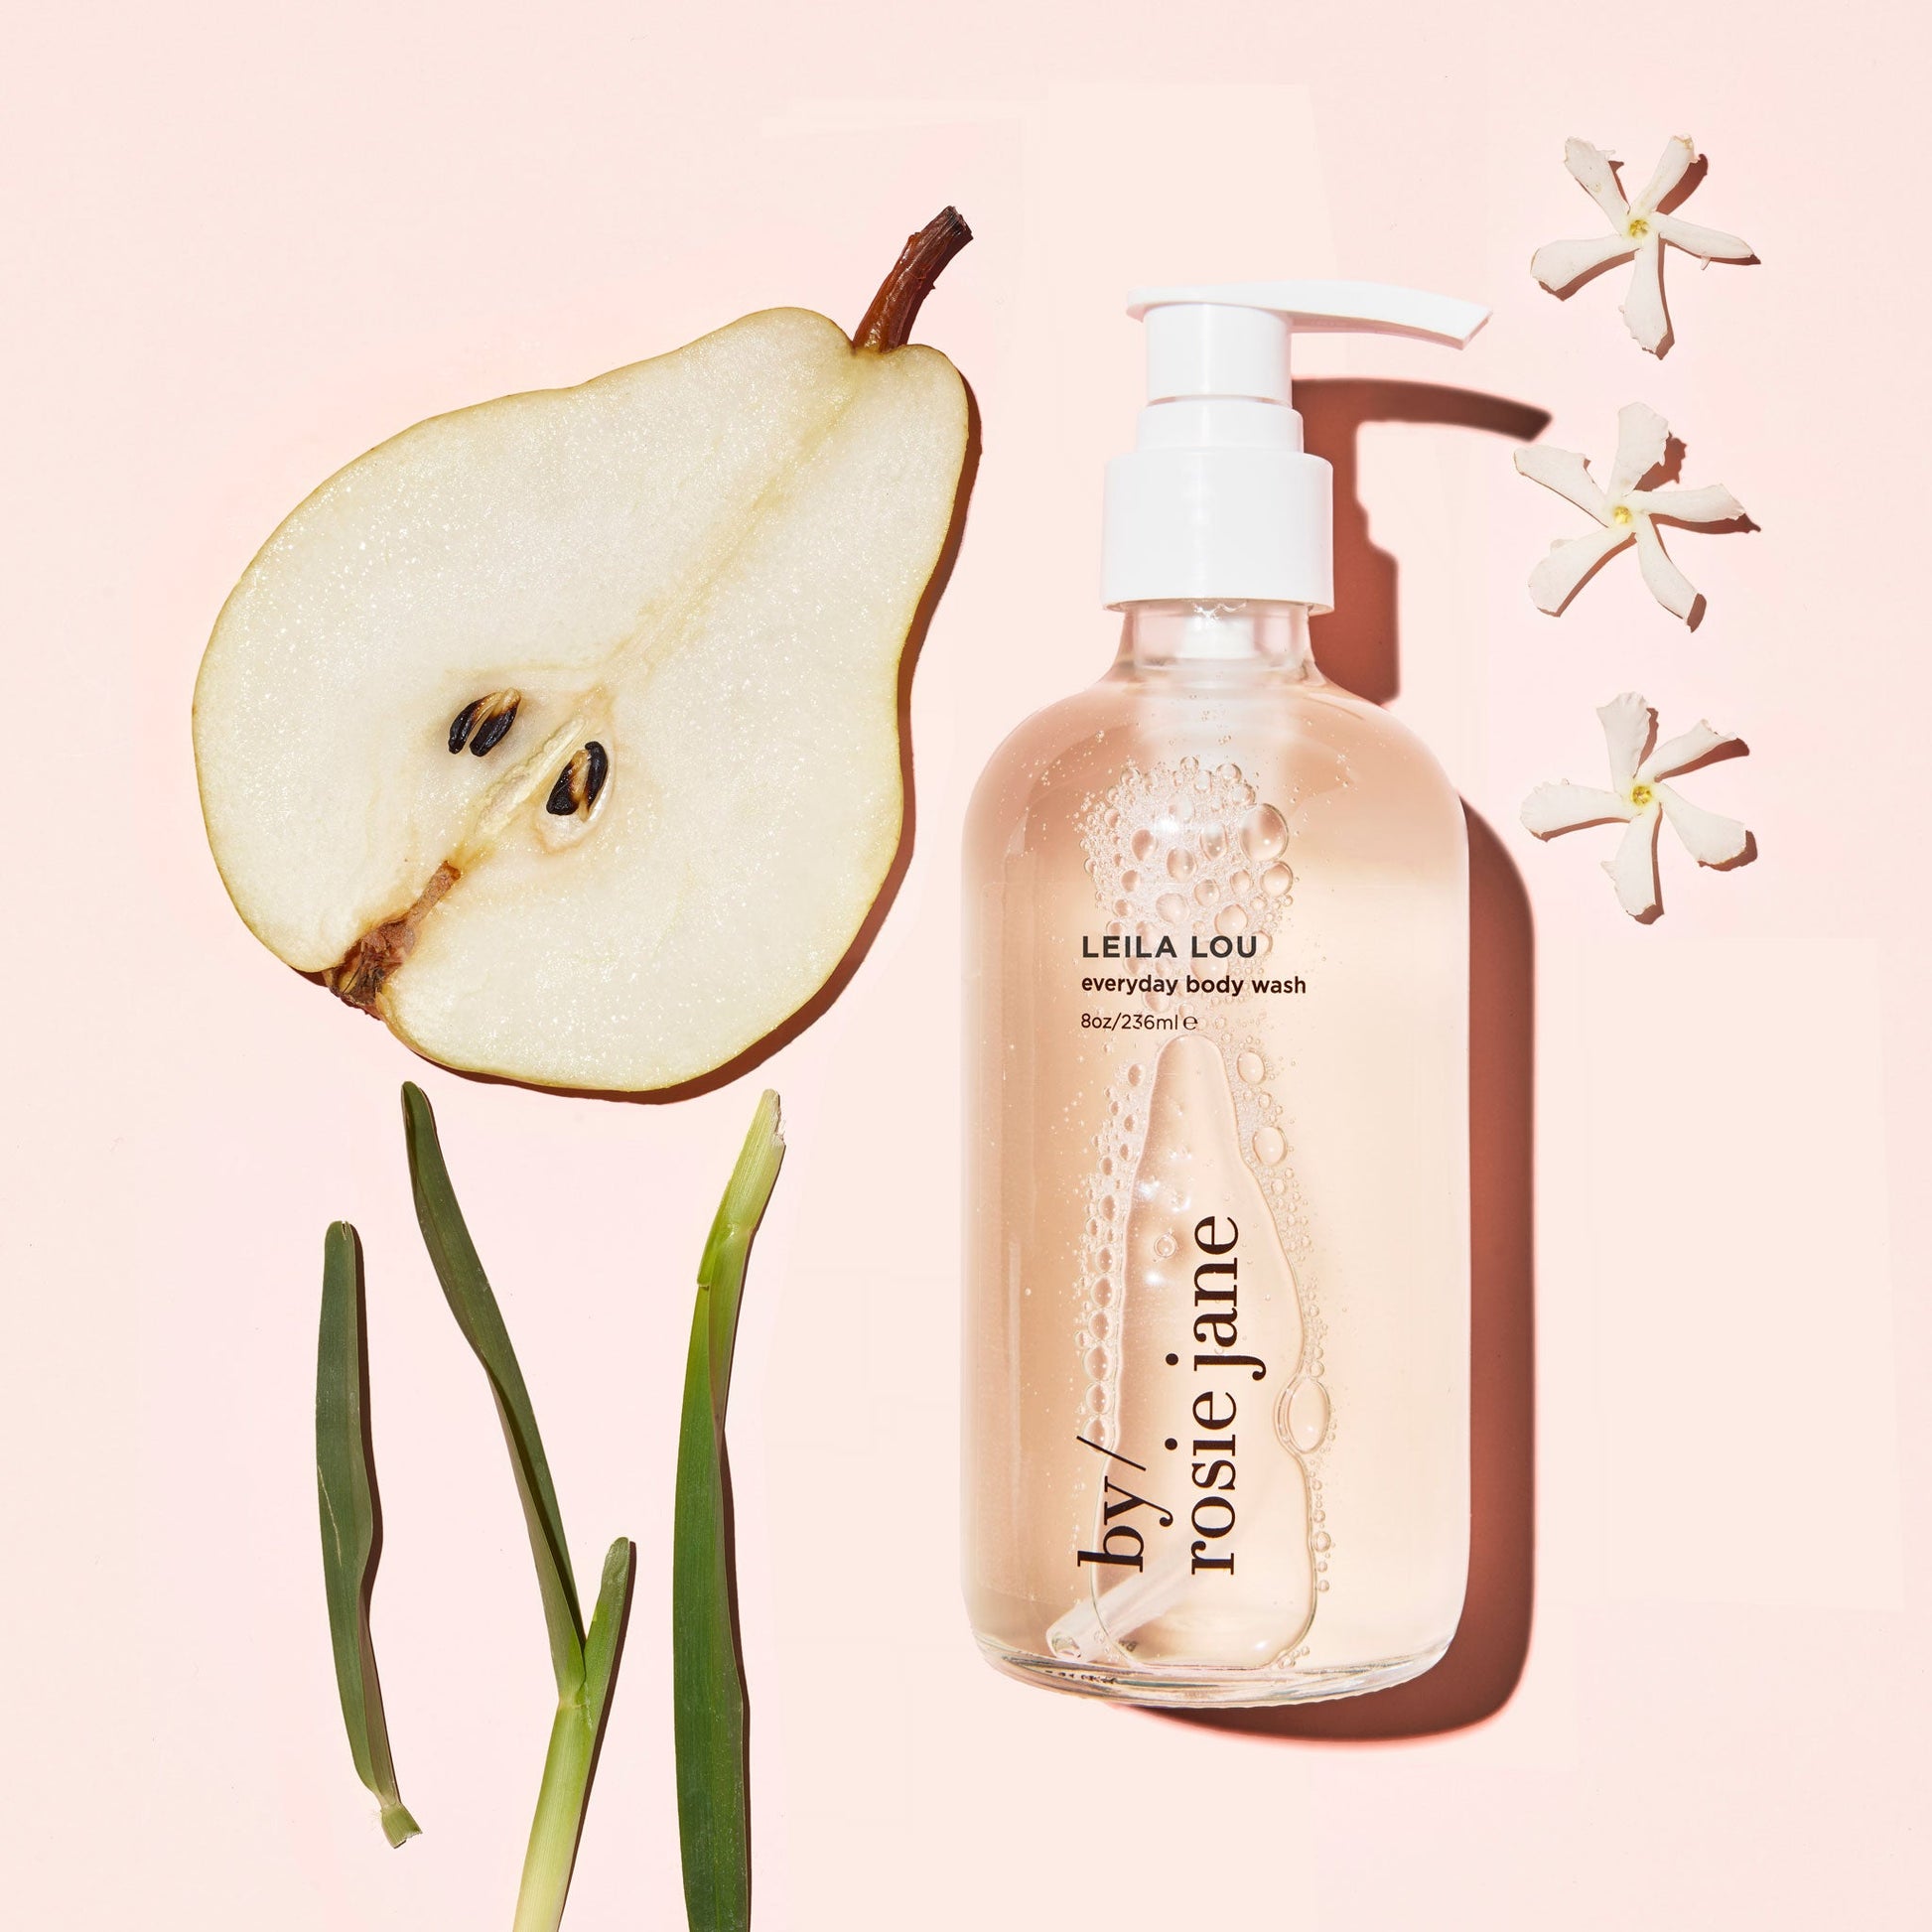 leila lou body wash with notes: pear, jasmine, and fresh cut grass.